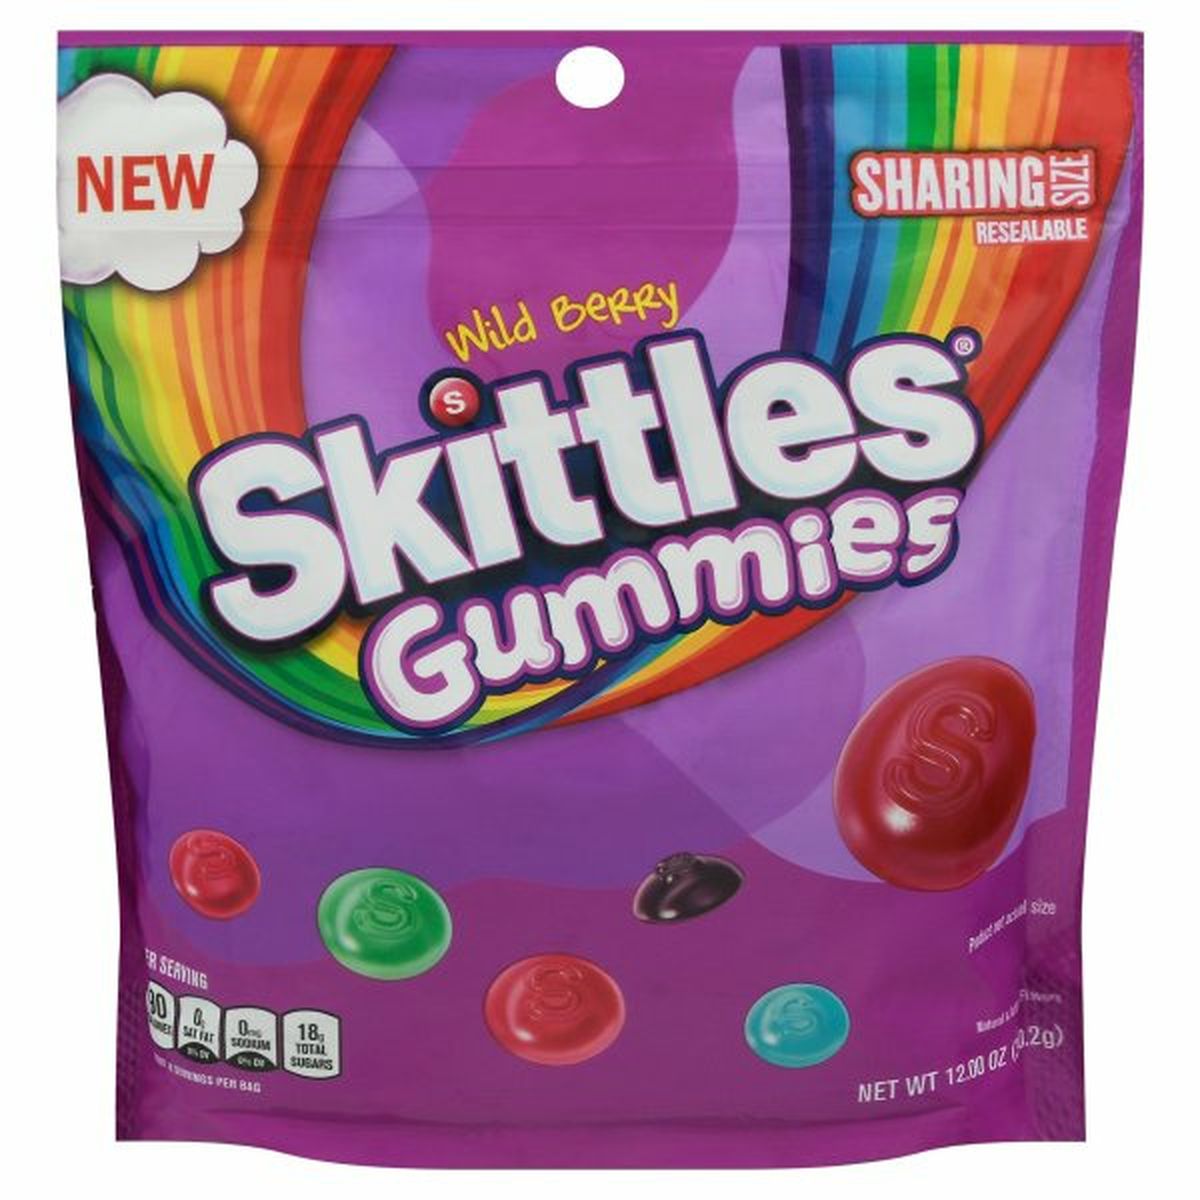 Calories in Skittles Gummies, Wild Berry, Sharing Size